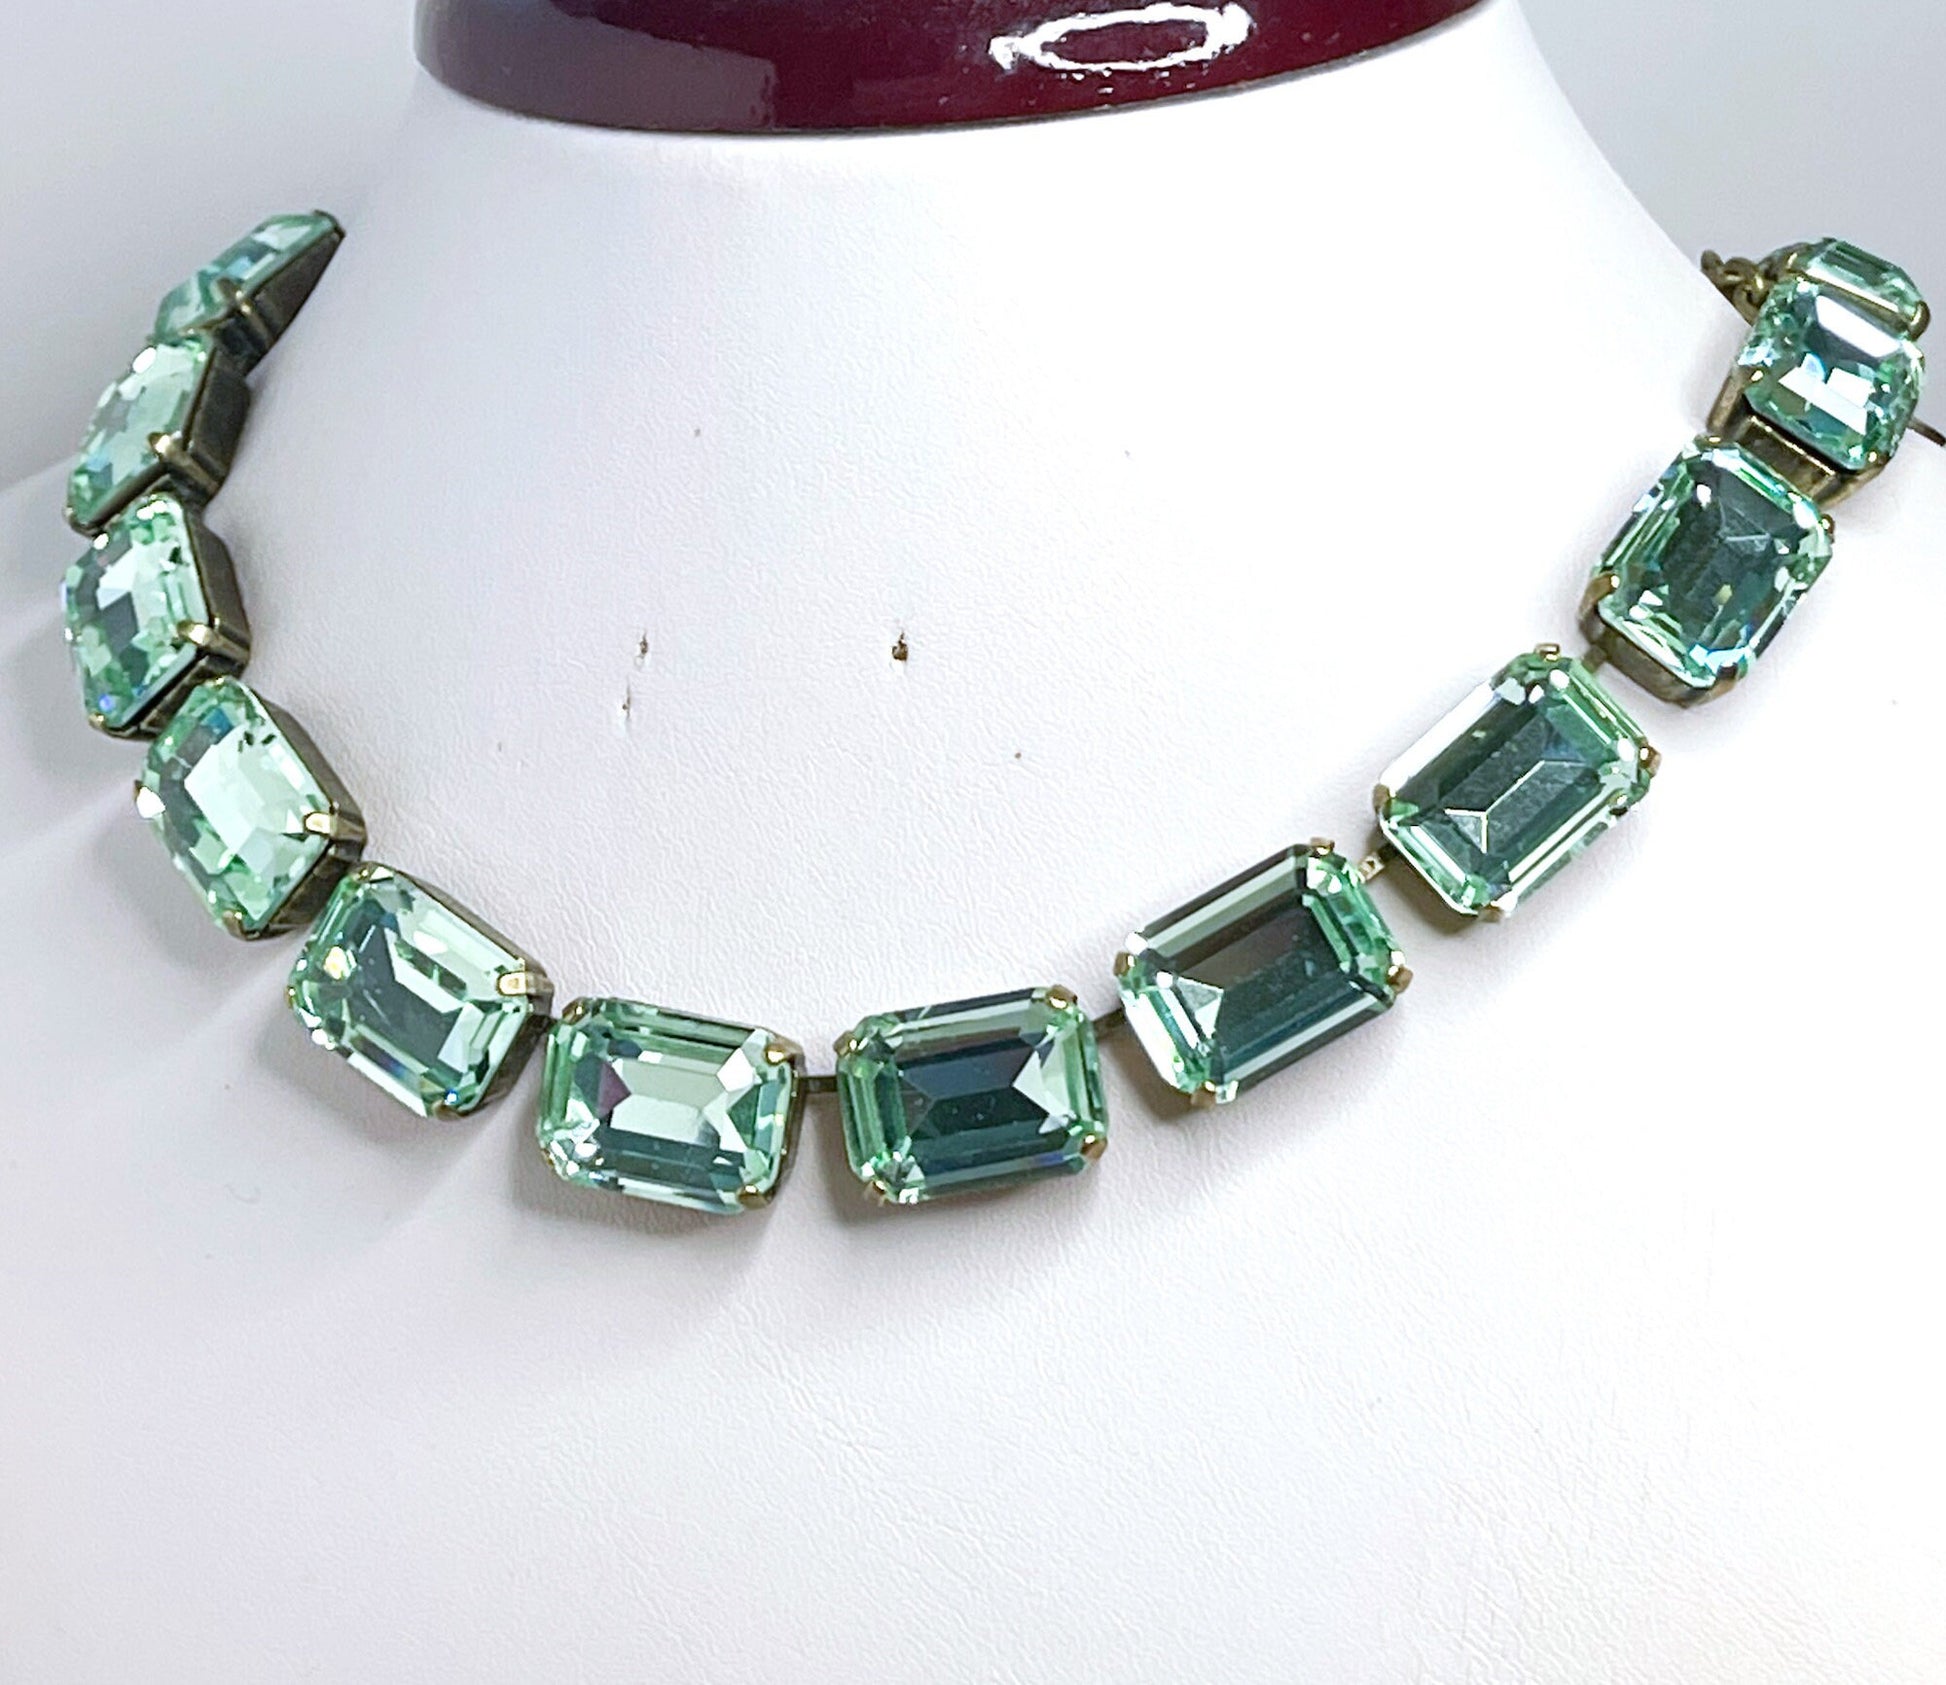 Mint Green Georgian Collet, Silver Patina Crystal Choker, Anna Wintour Style, Ice Riviere Necklace, Statement Necklace, Layering Chokers